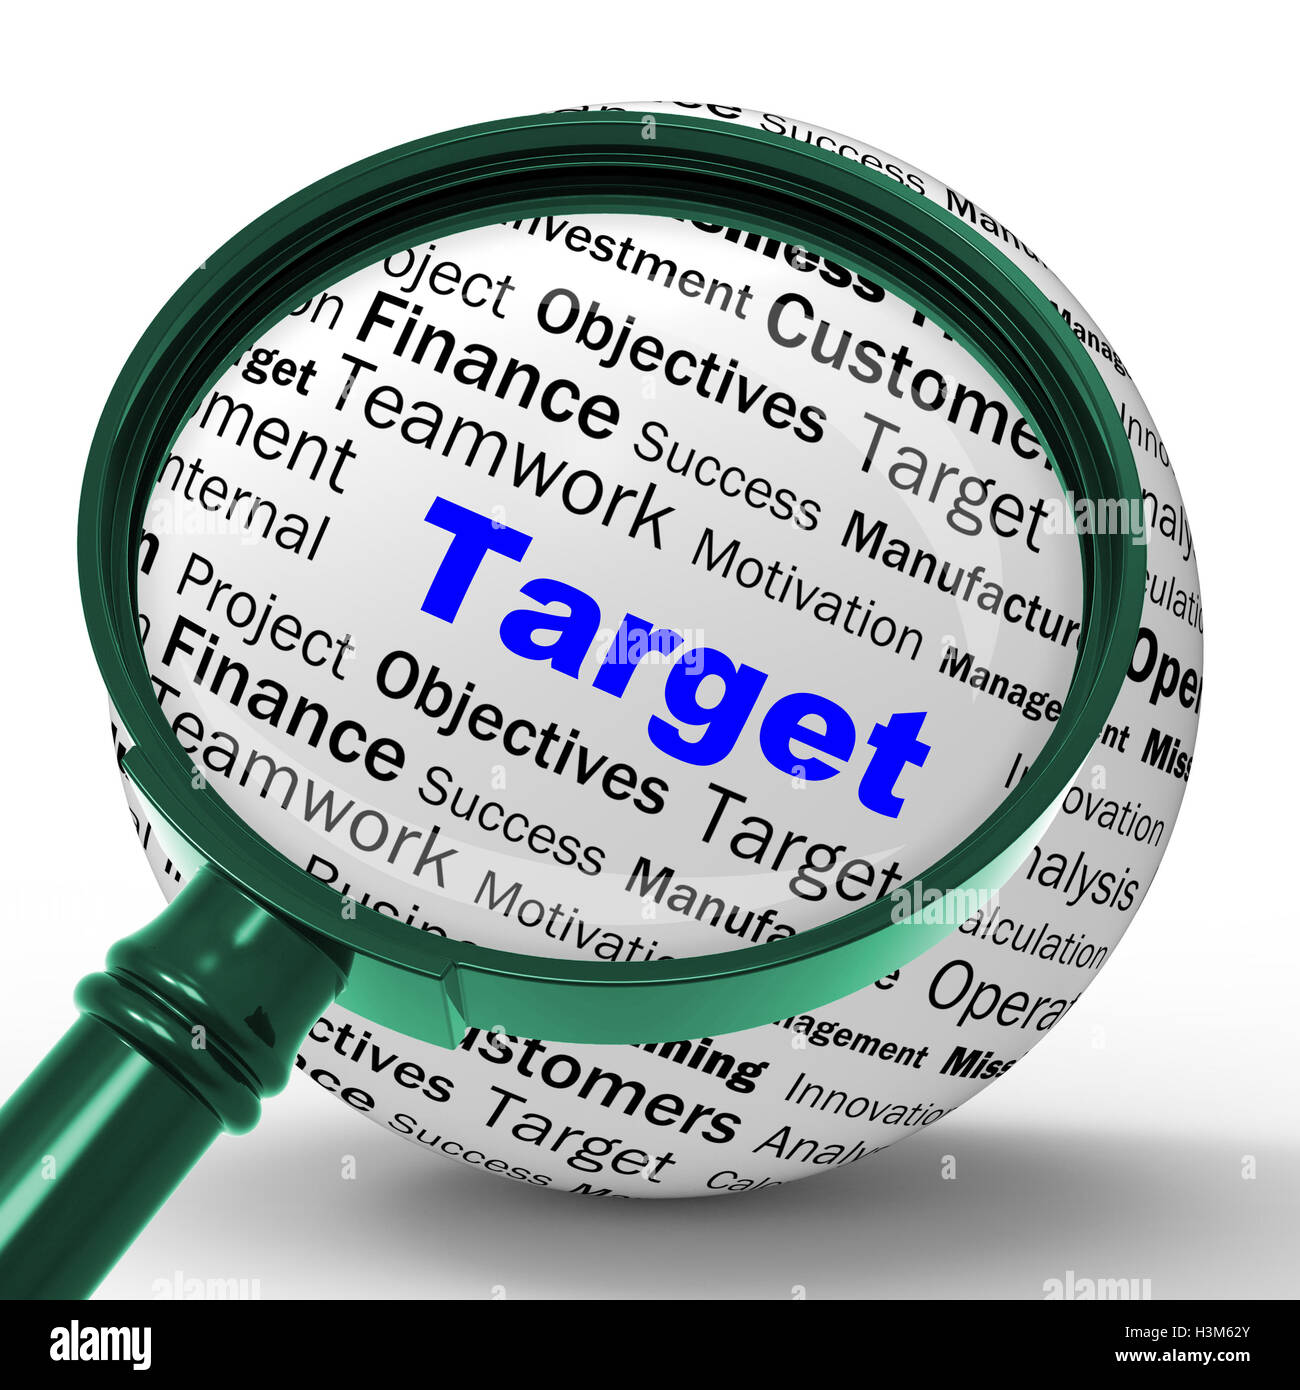 Target Magnifier Definition Means Business Goals And Objectives Stock Photo